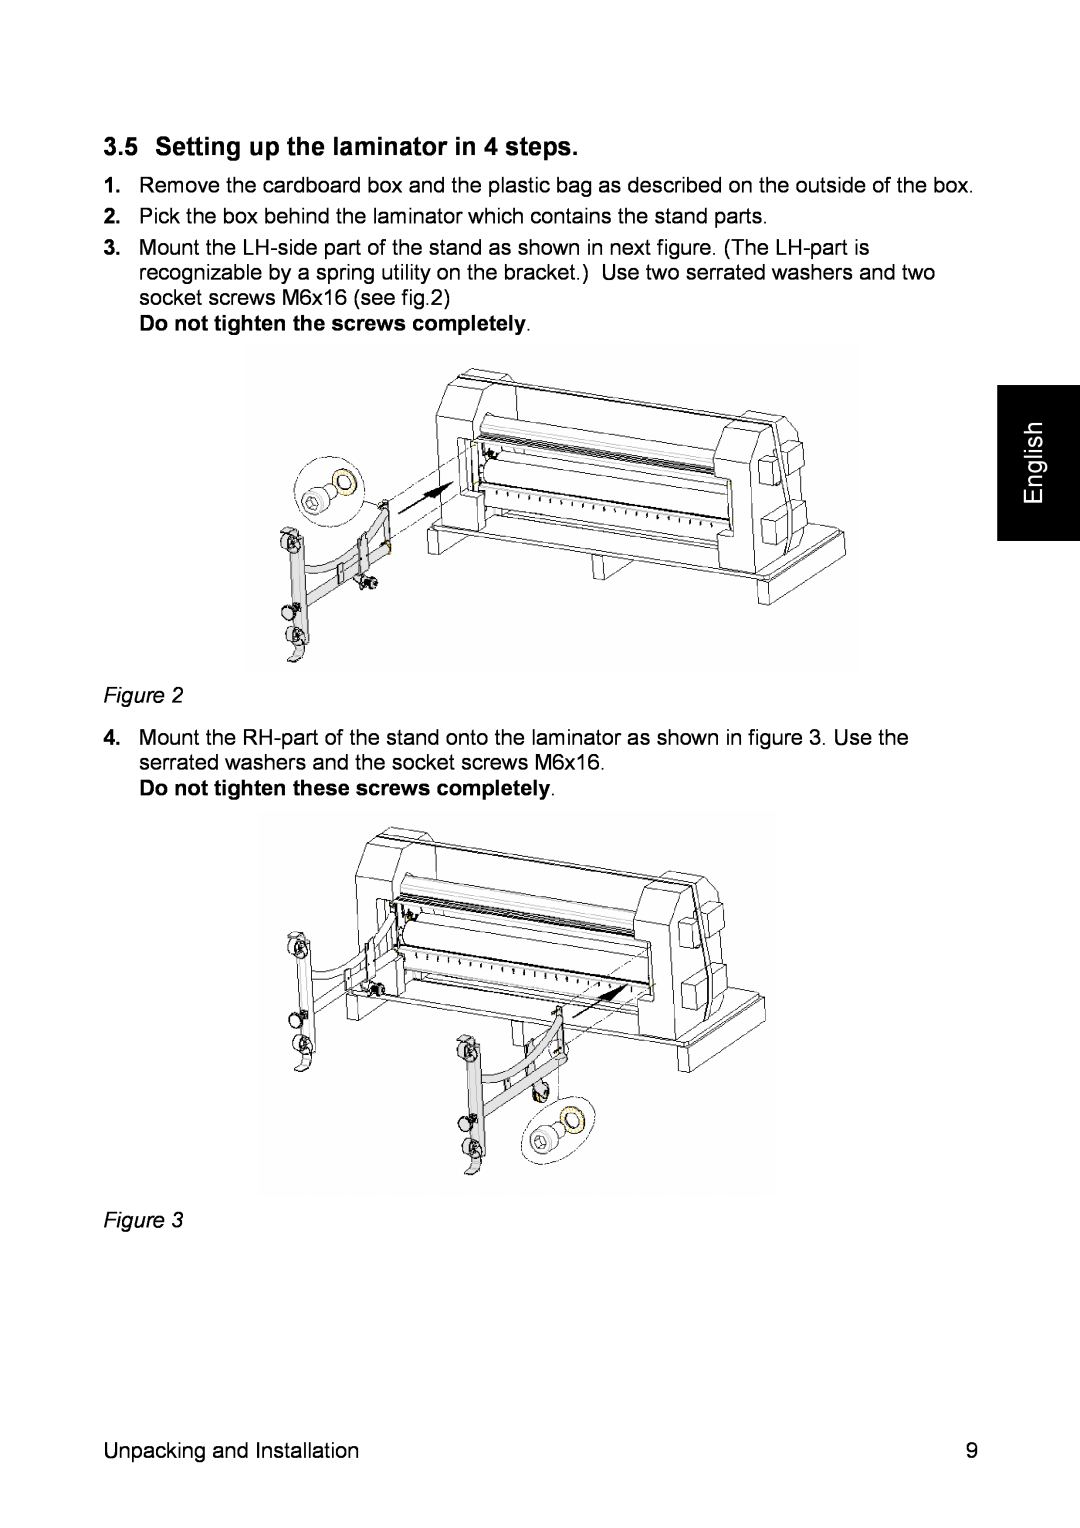 SEAL 44/62 user manual Setting up the laminator in 4 steps, English 